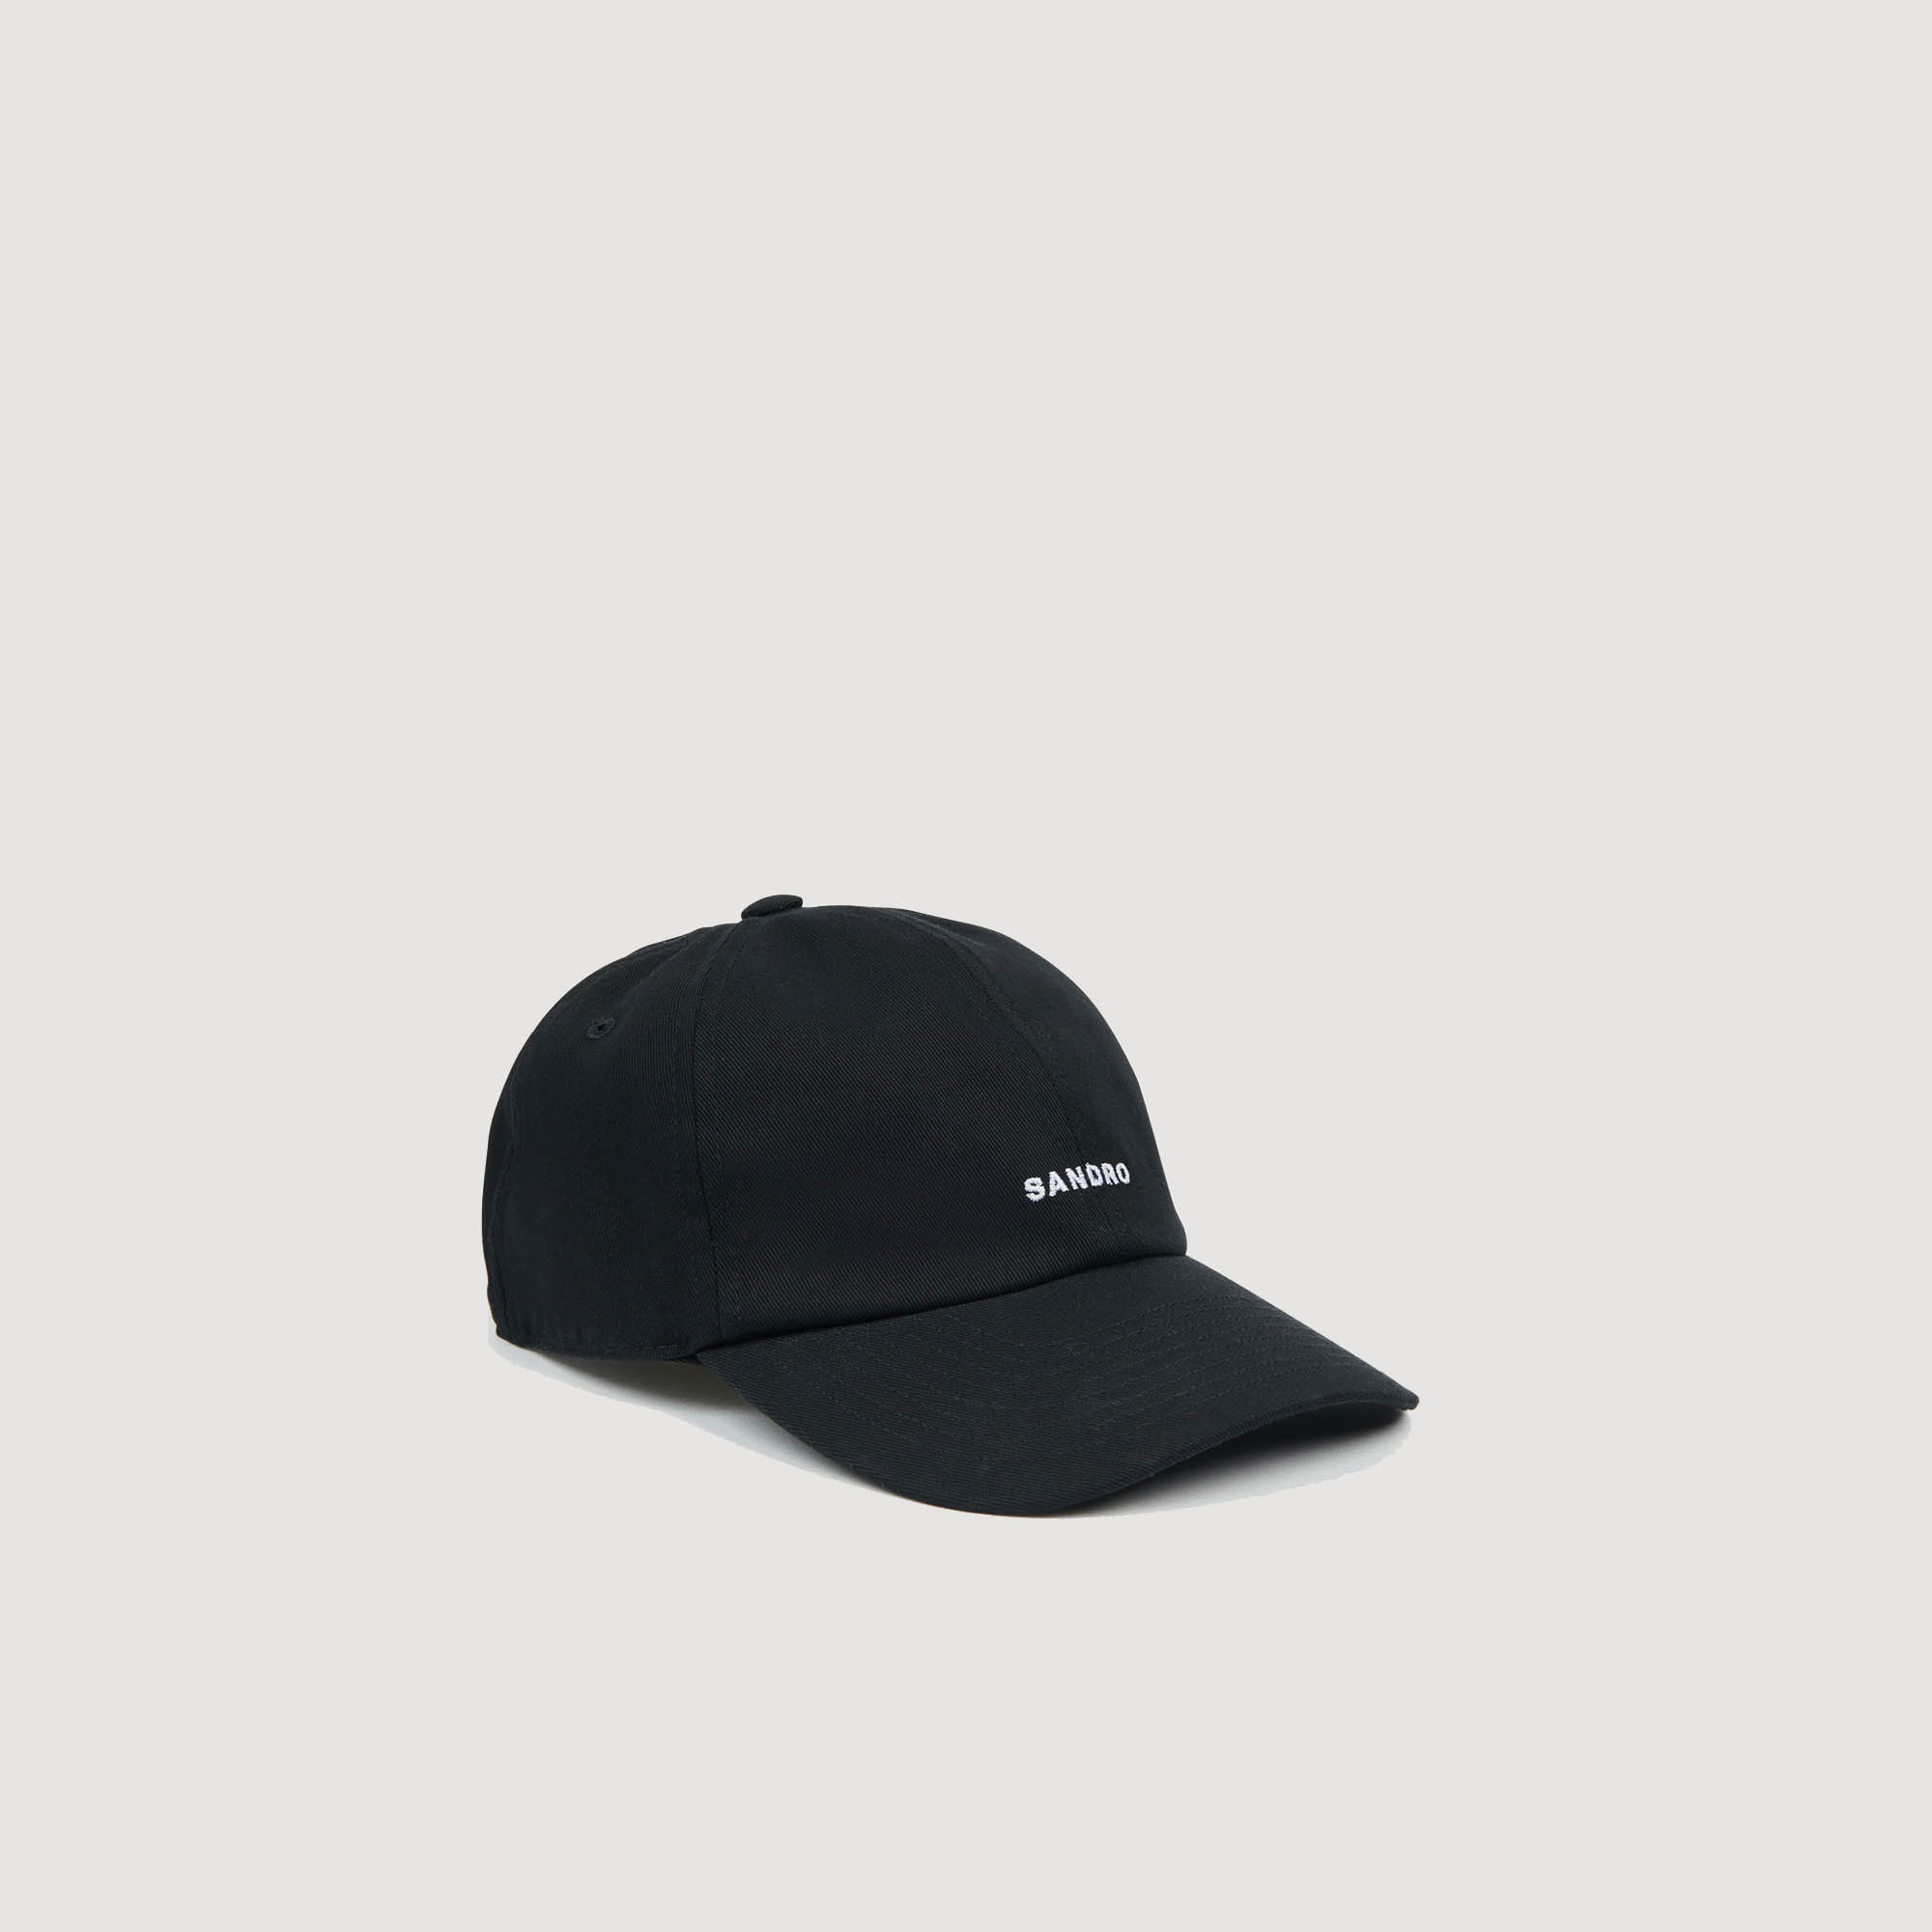 Sandro cotton Embroidery: Sandro men's cap â€¢ Cotton cap â€¢ Embroidered Sandro logo â€¢ Metal buckle on the back The cotton in this item was produced organically via a cultivation method that preserves biodiversity and bans the use of pesticides and GMOs